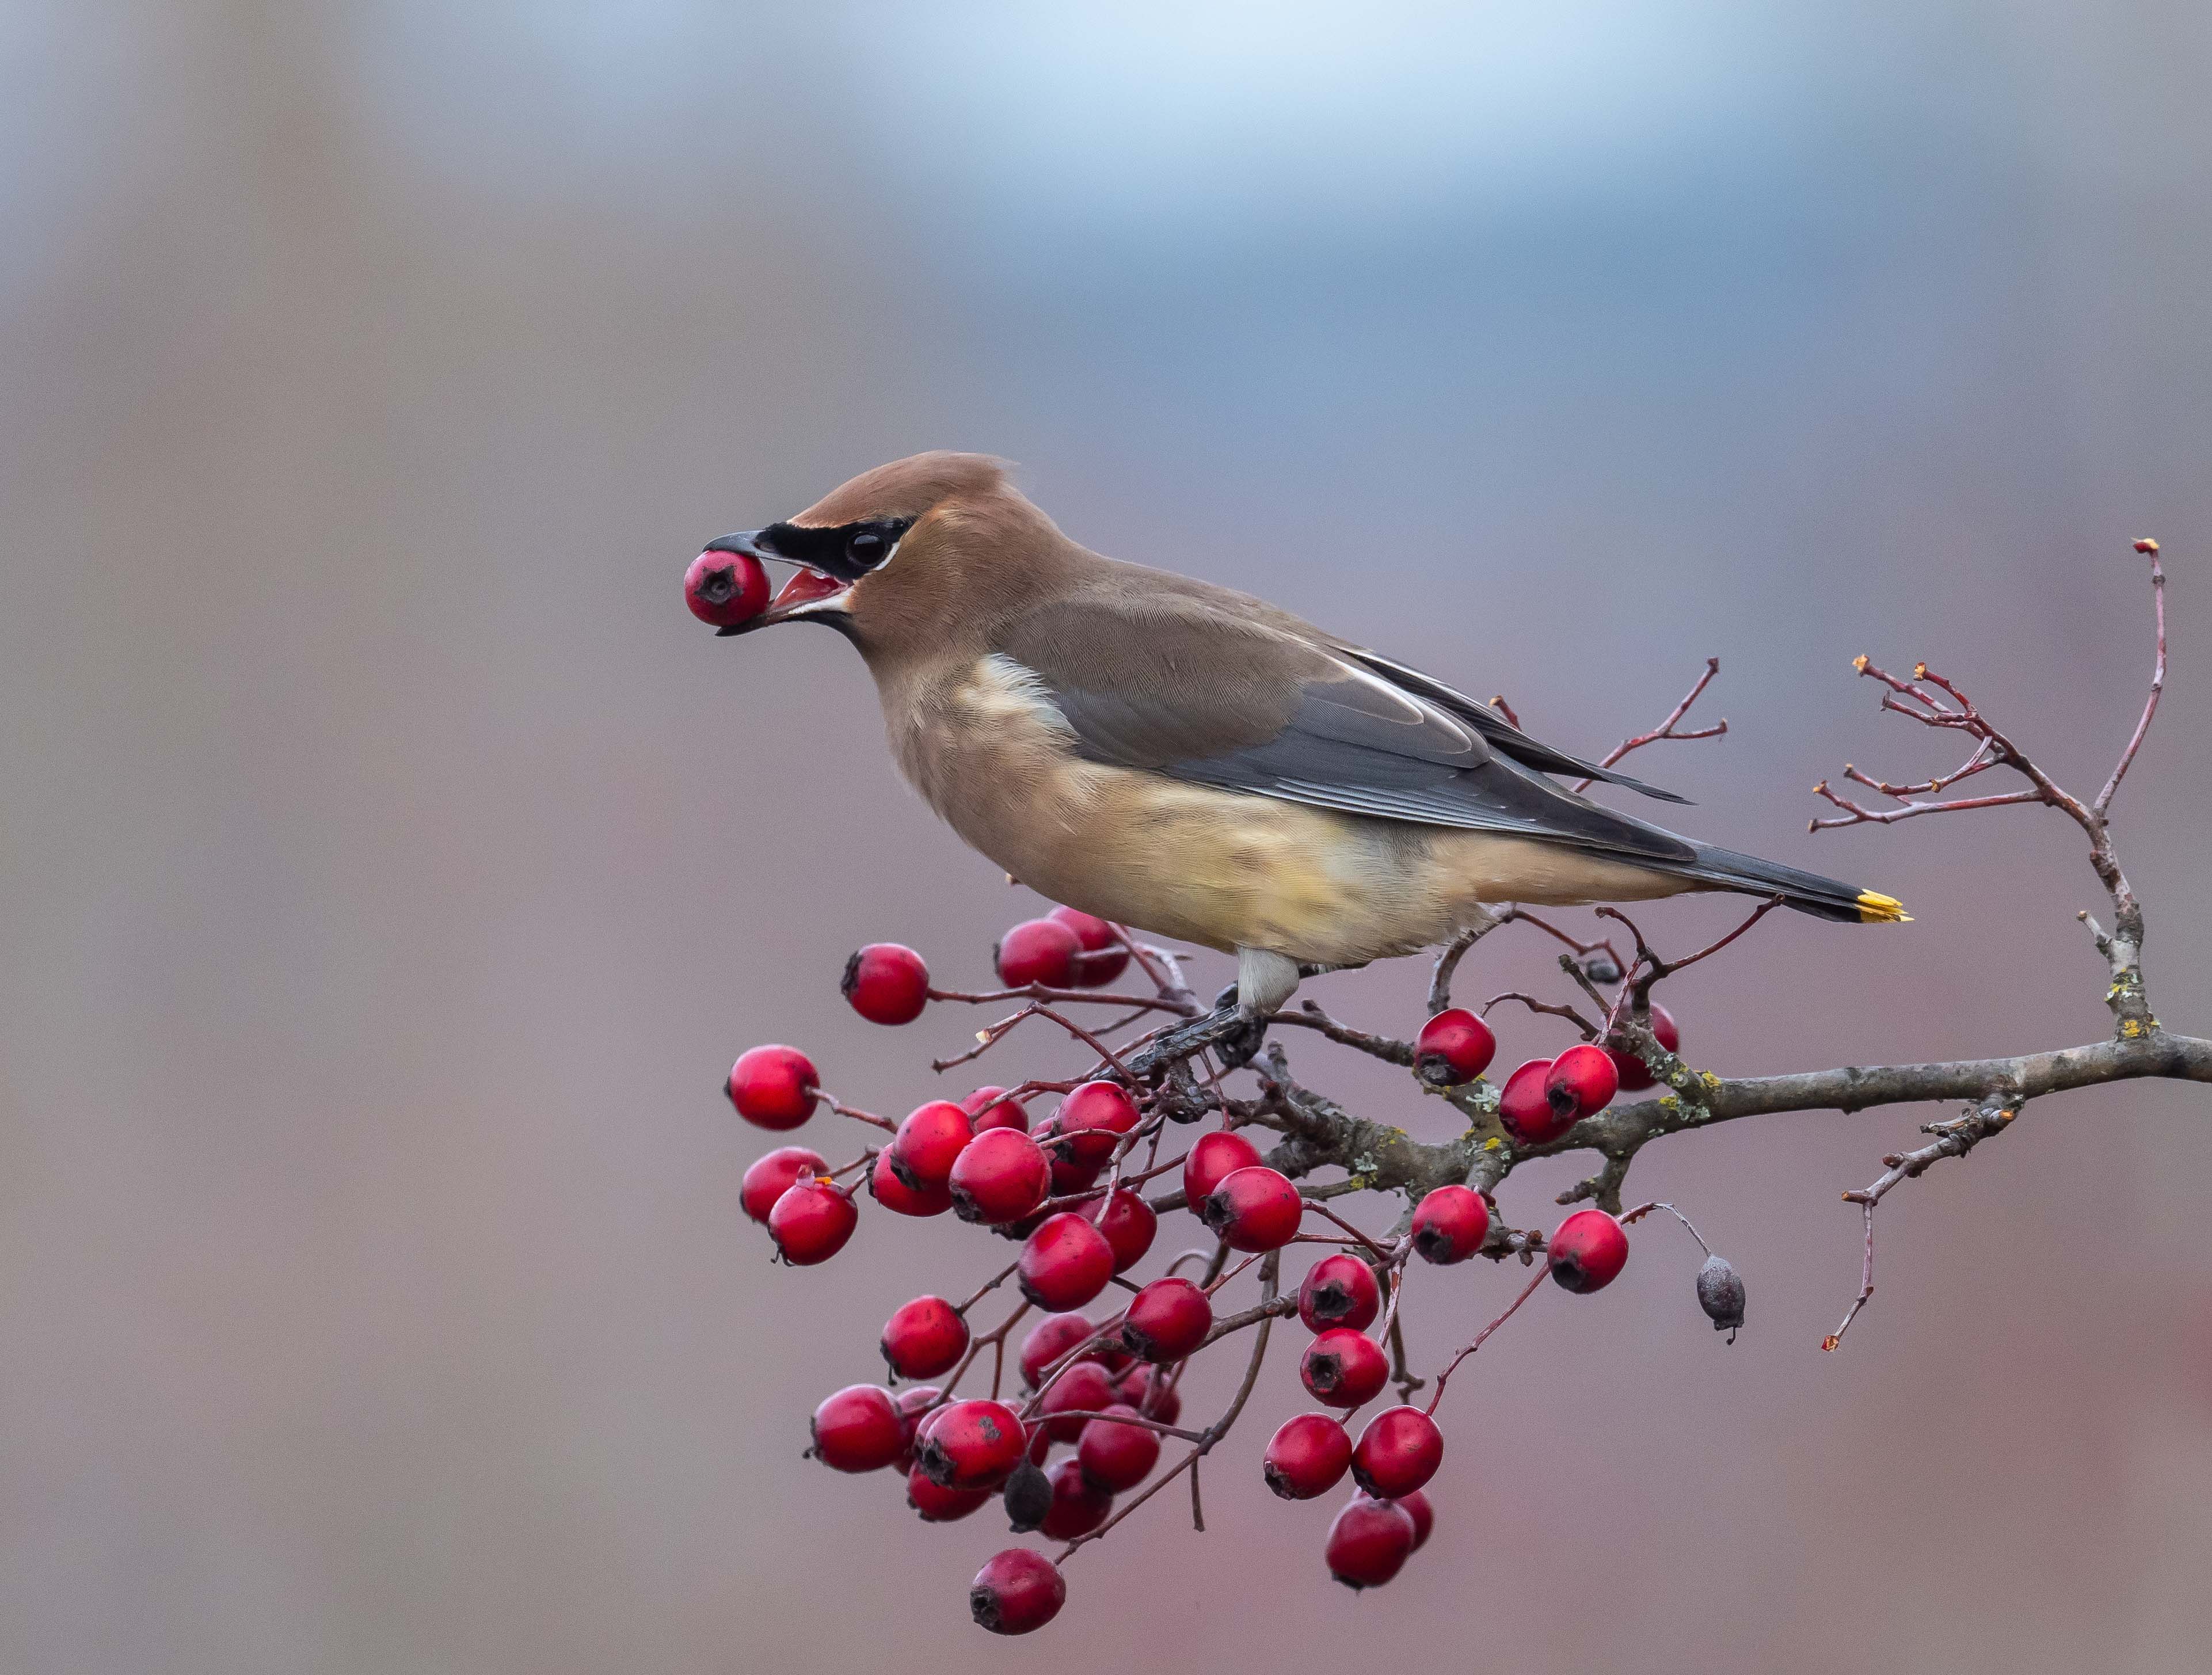 Cedar Waxwing perched on a branch while eating berries